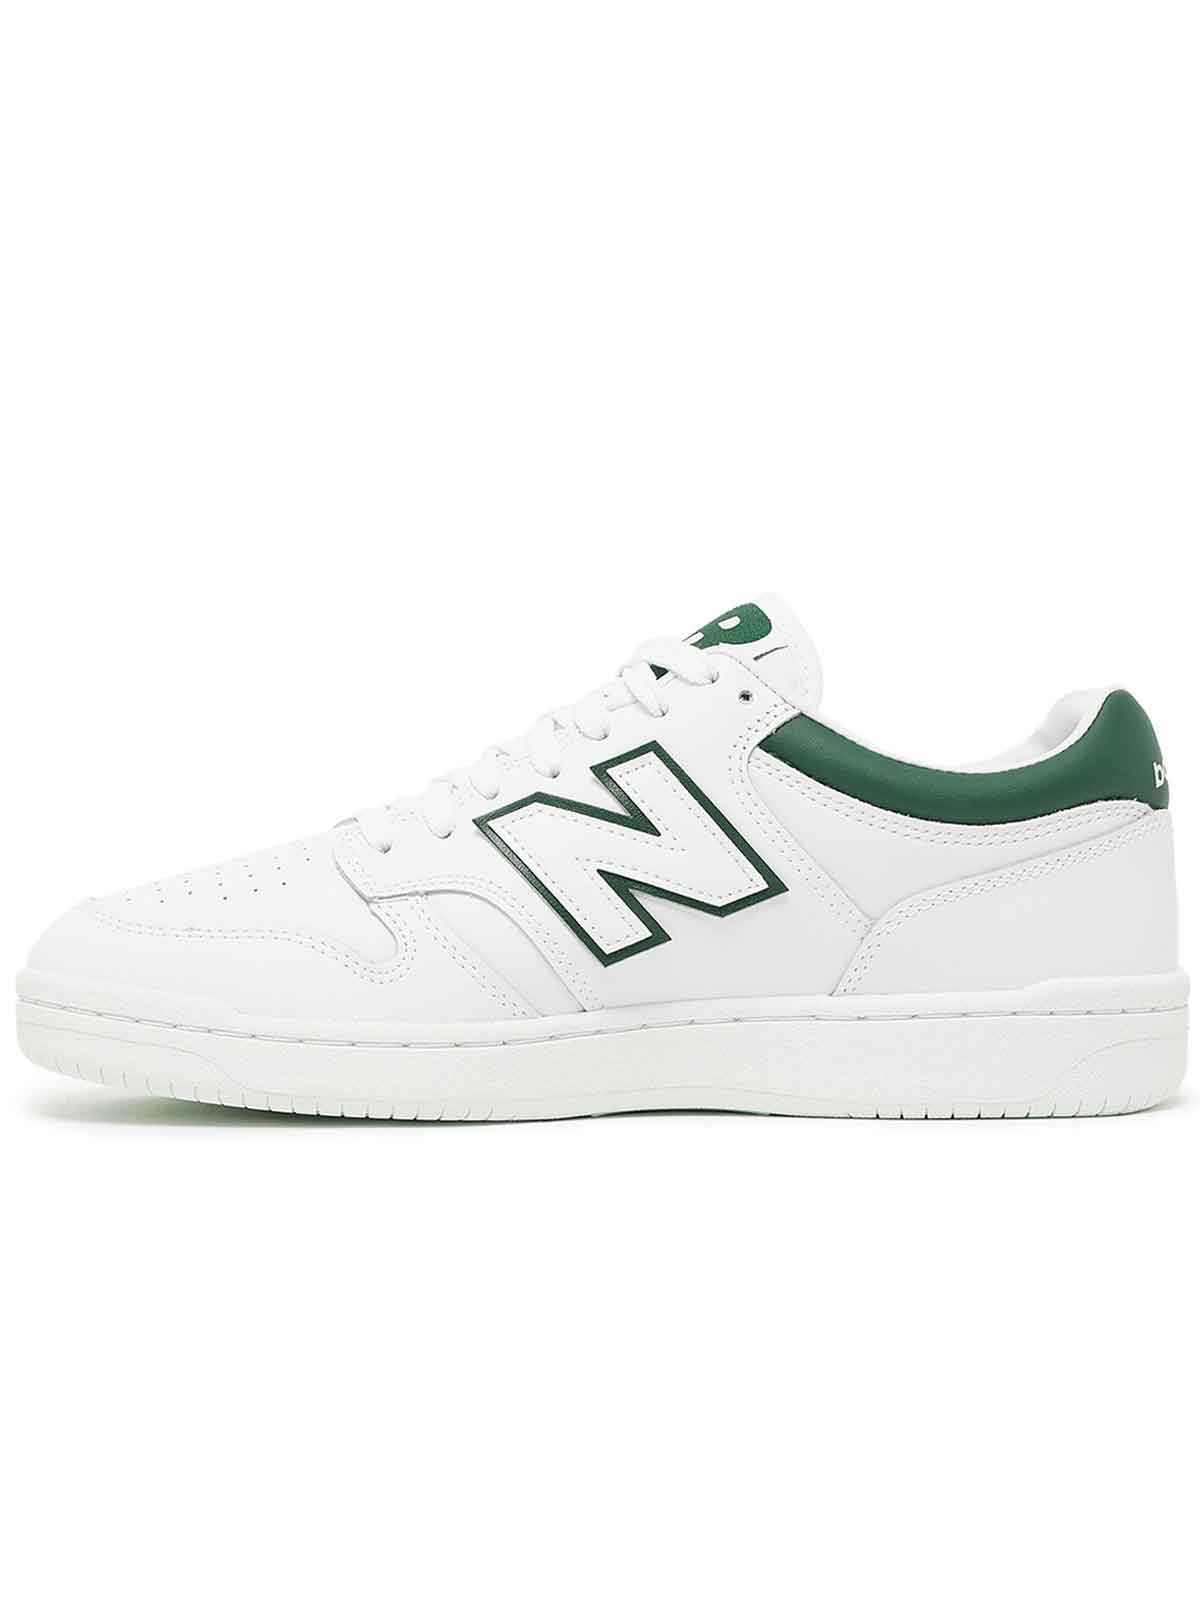   New Balance | 480 Green White Sneakers |  